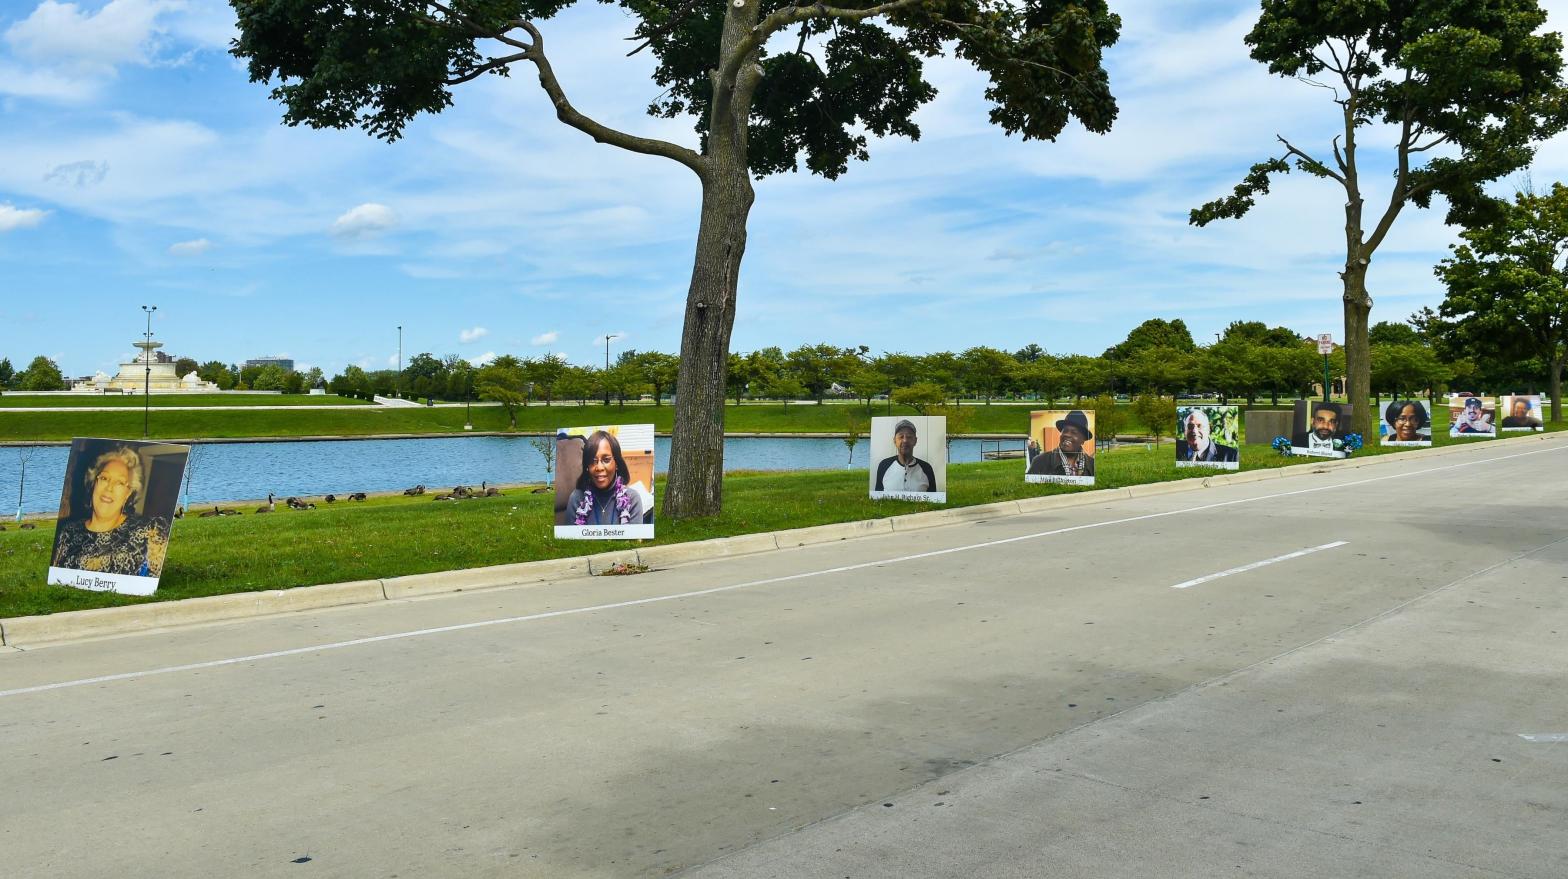 A drive-by memorial of covid-19 victims at the Belle Isle State Park on September 2, 2020 in Detroit, Michigan. (Photo: Aaron J. Thornton, Getty Images)